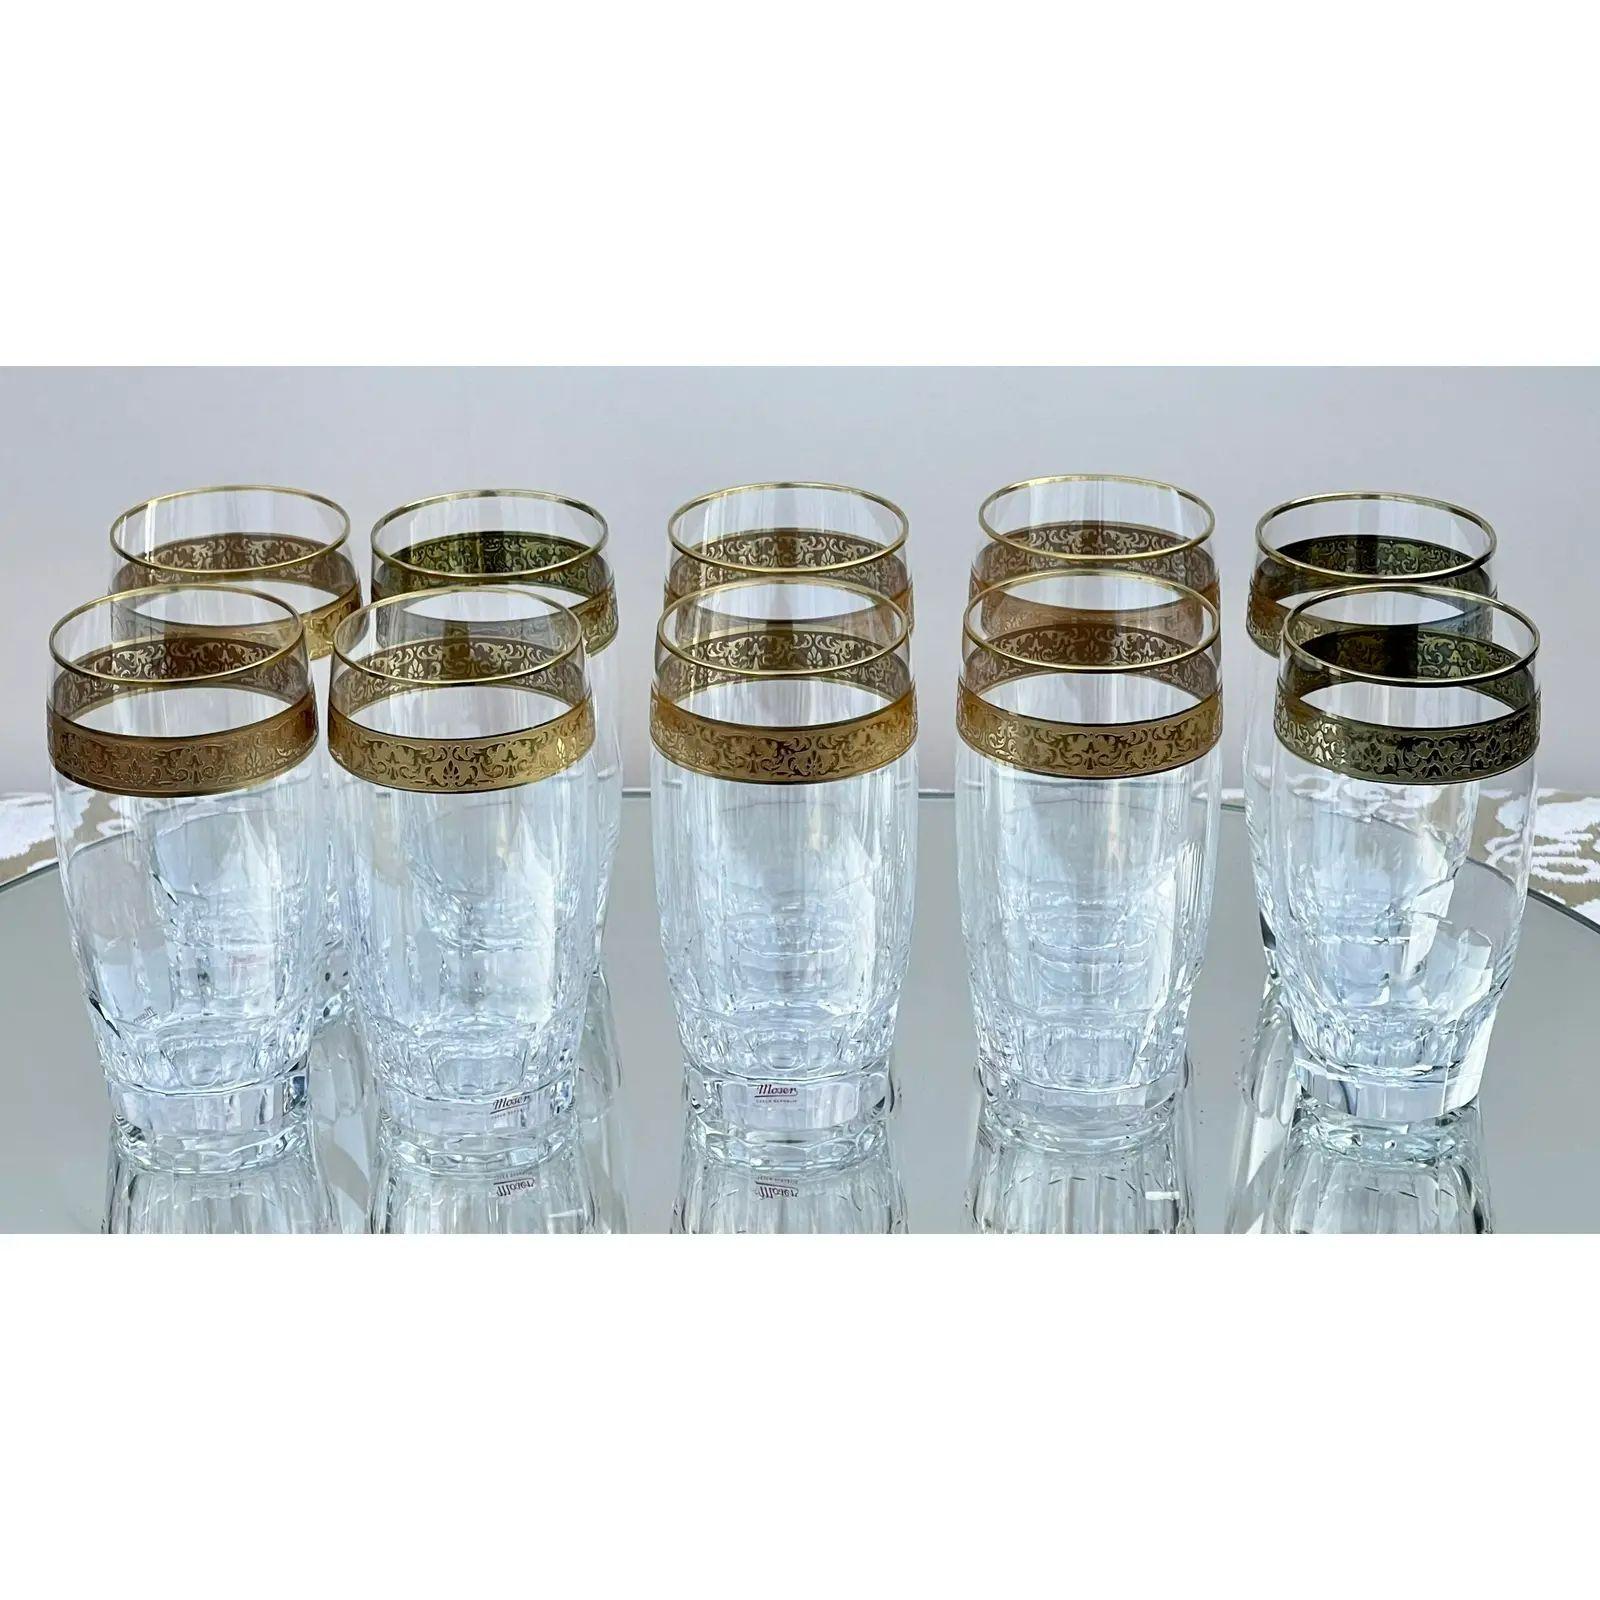 Art Deco Set of 10 Moser Gold Encrusted Crystal Juice Tumblers, 1980s For Sale